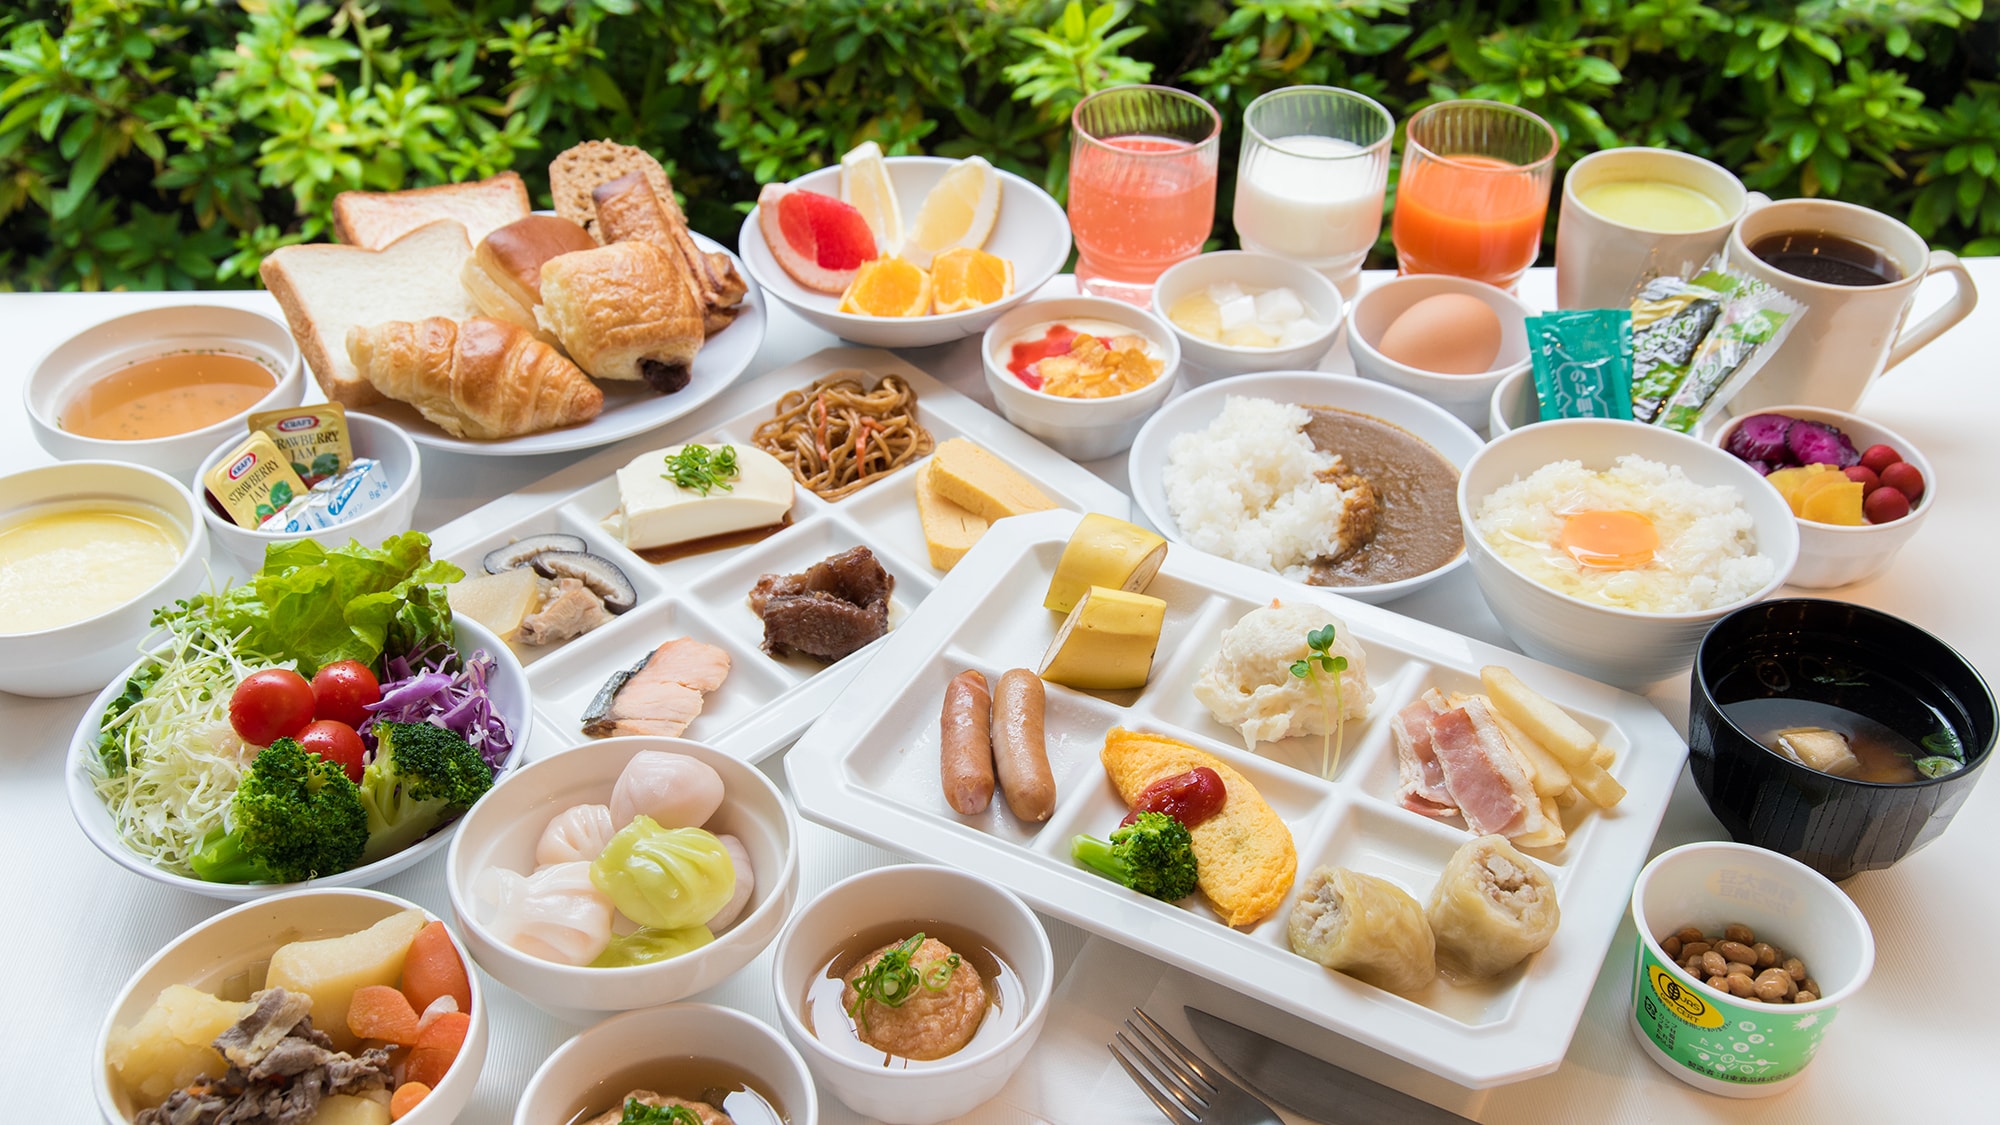 [Breakfast Buffet] With the addition of new dishes, the variety of dishes has been further enhanced!